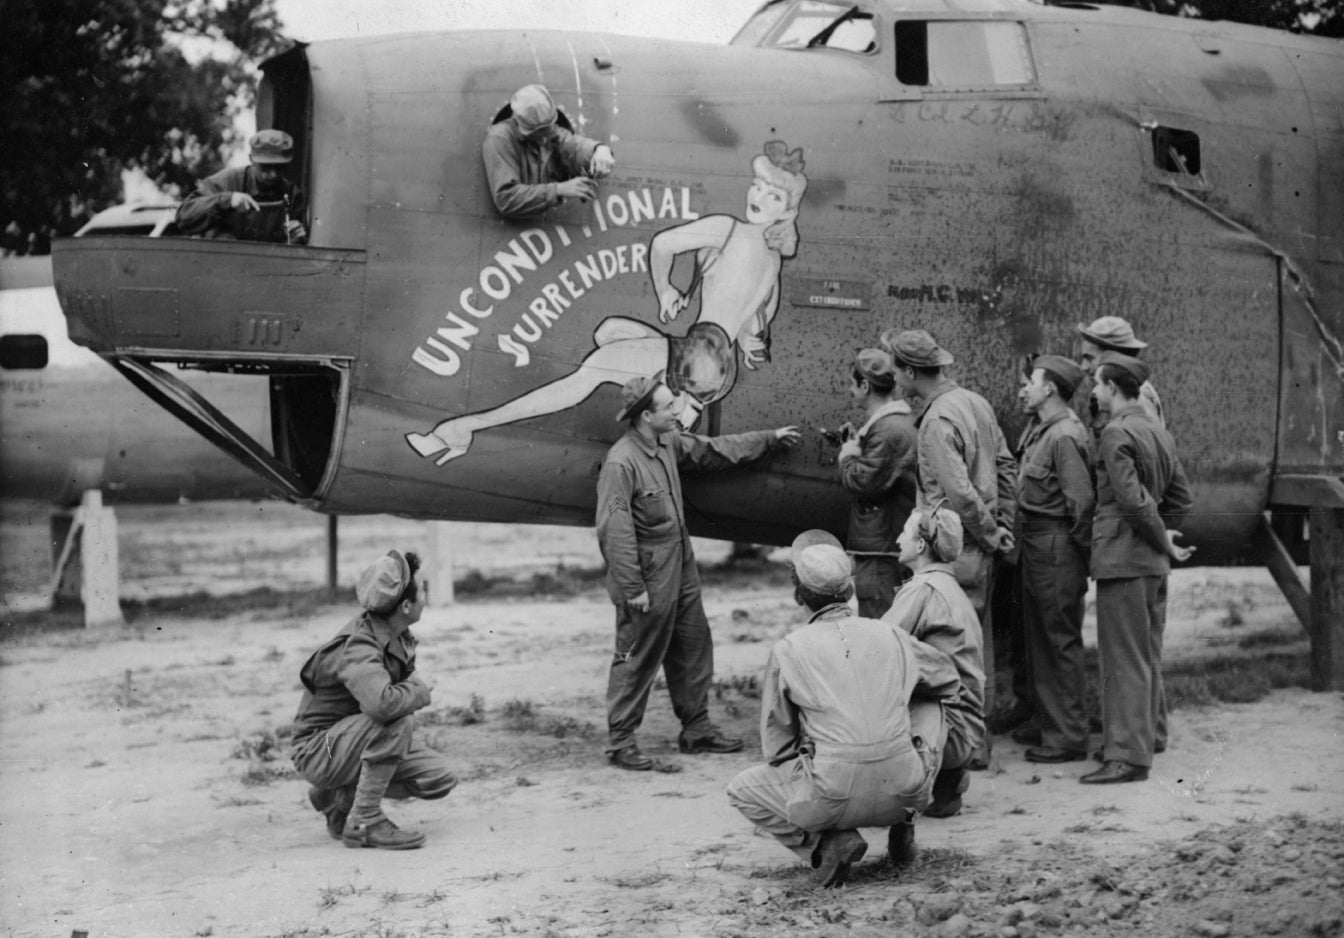 Airmen of the 491st Bomb Group admire the nose art of a B-24 Liberator (serial number 42-110146) nicknamed "Unconditional Surrender".